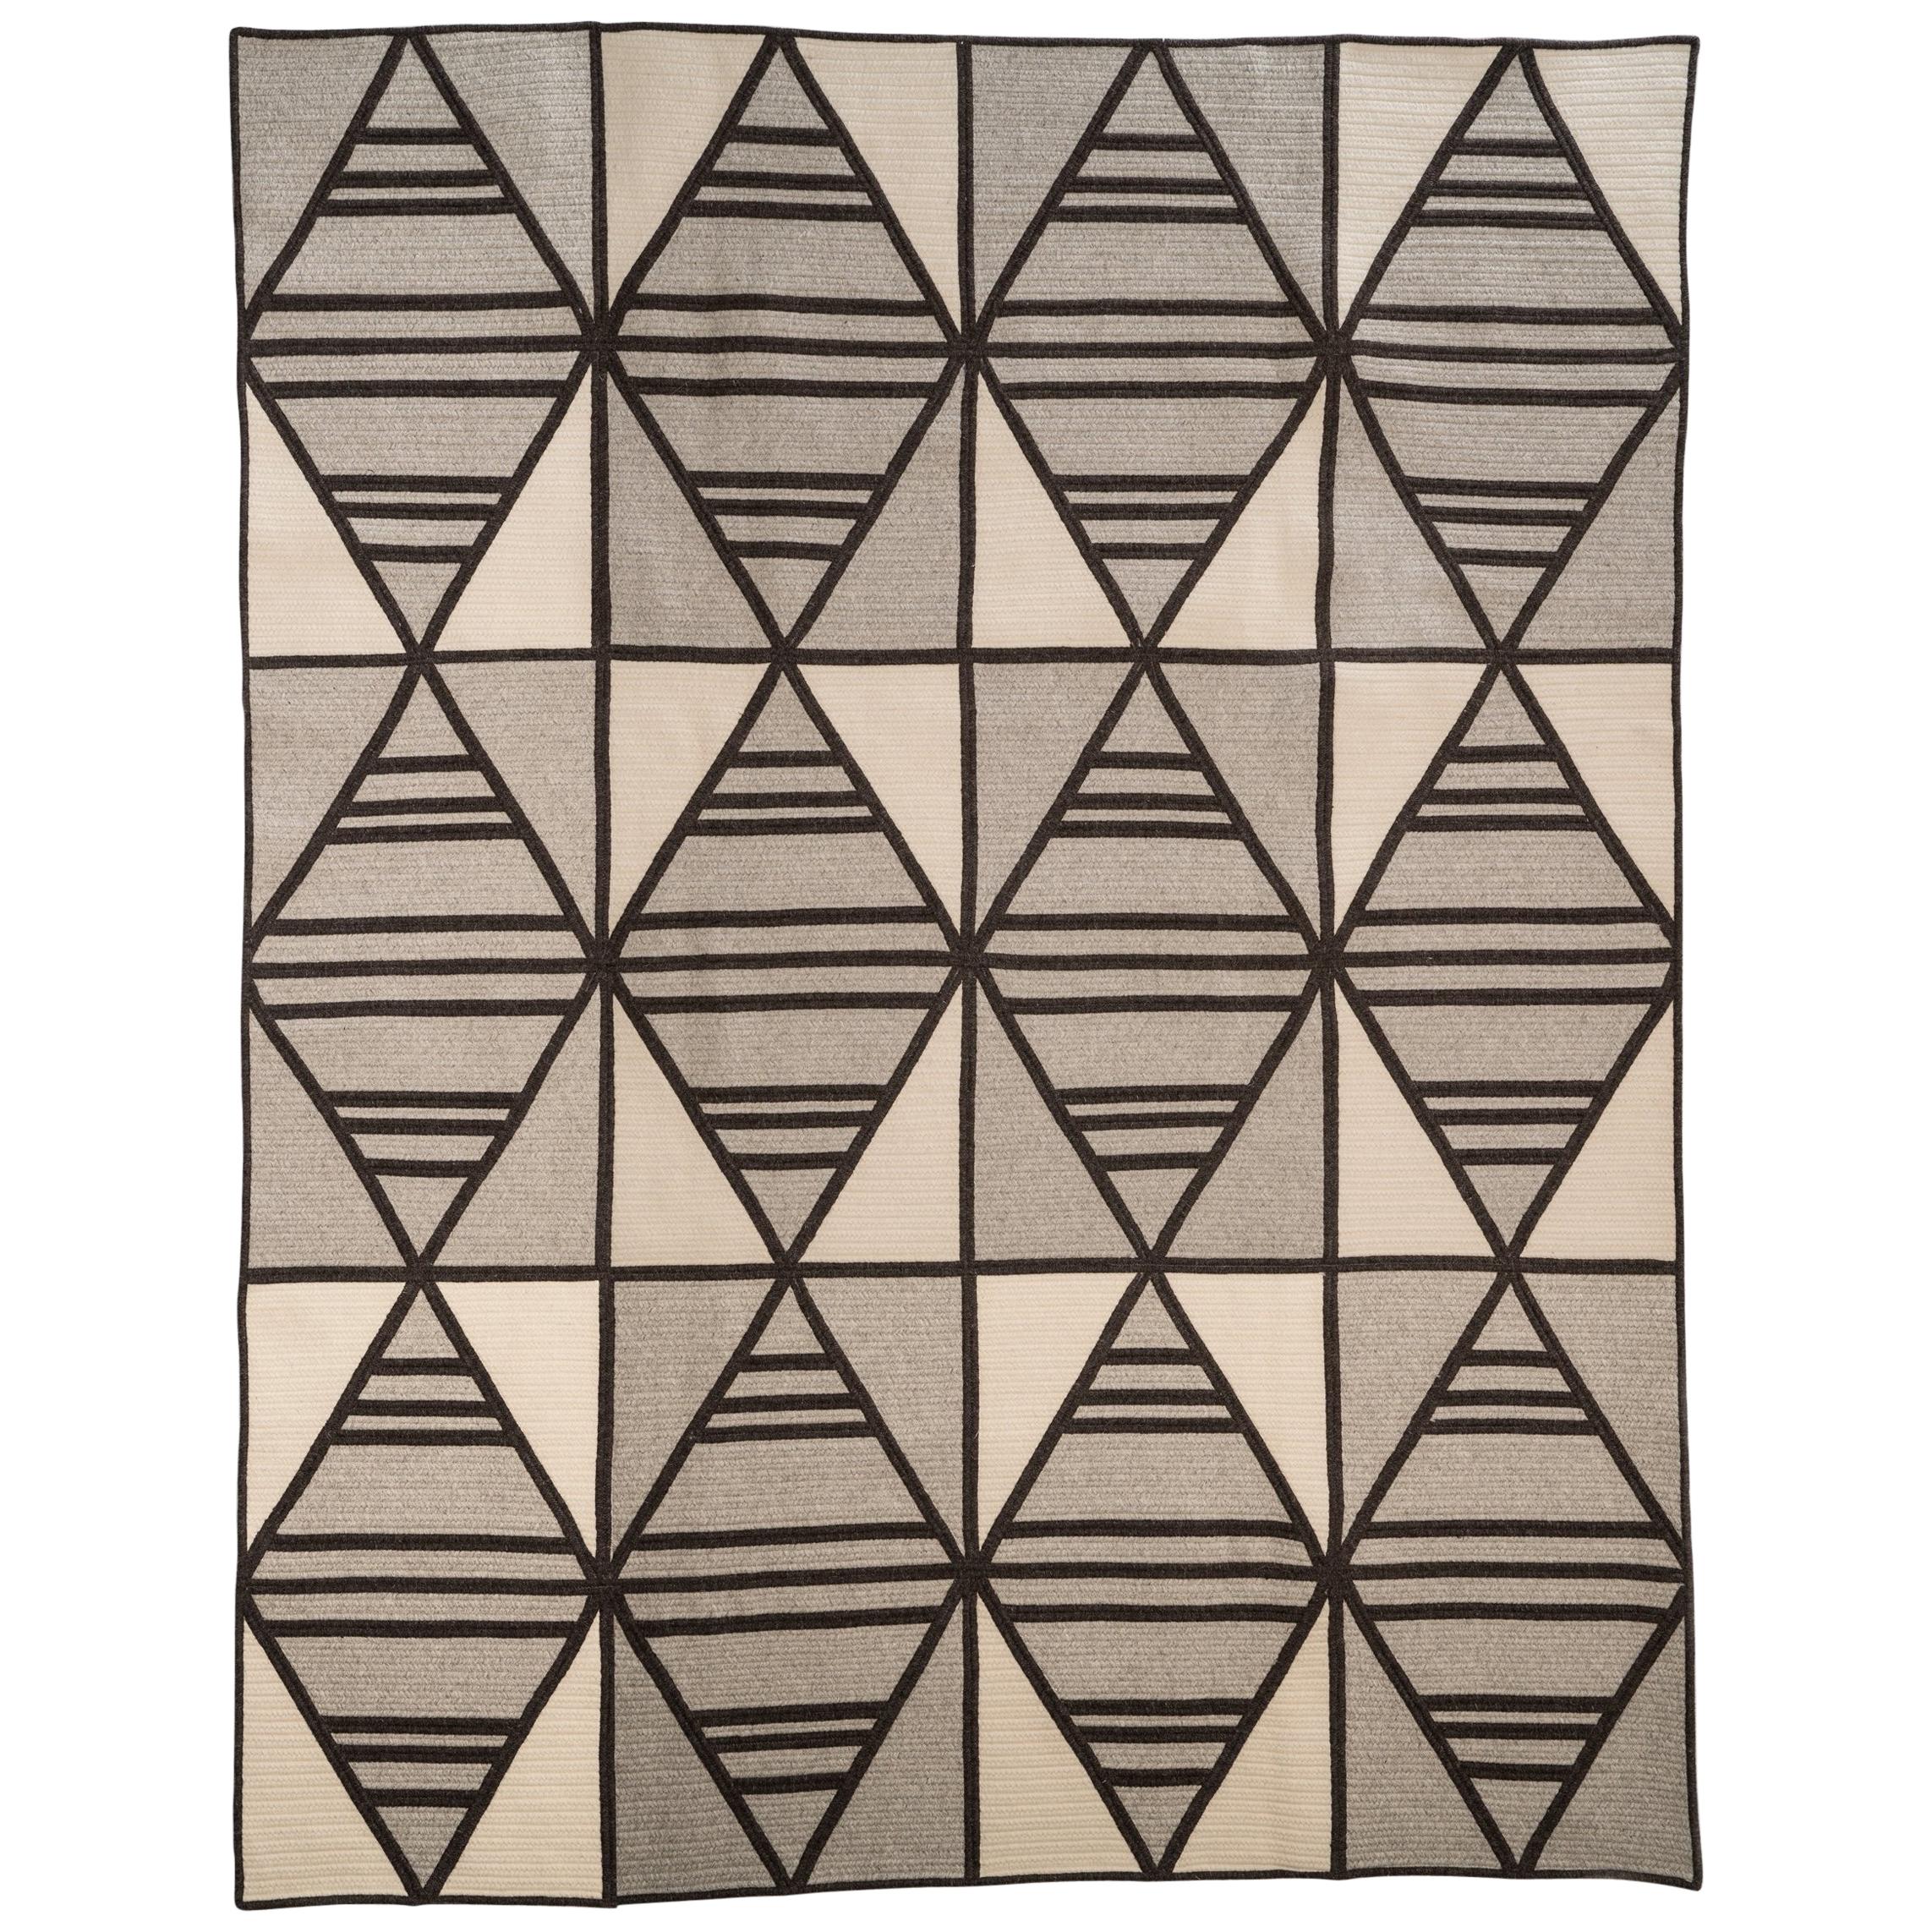 Shift Wool Rug in Brown, Grey and Cream, Custom Made in the USA For Sale